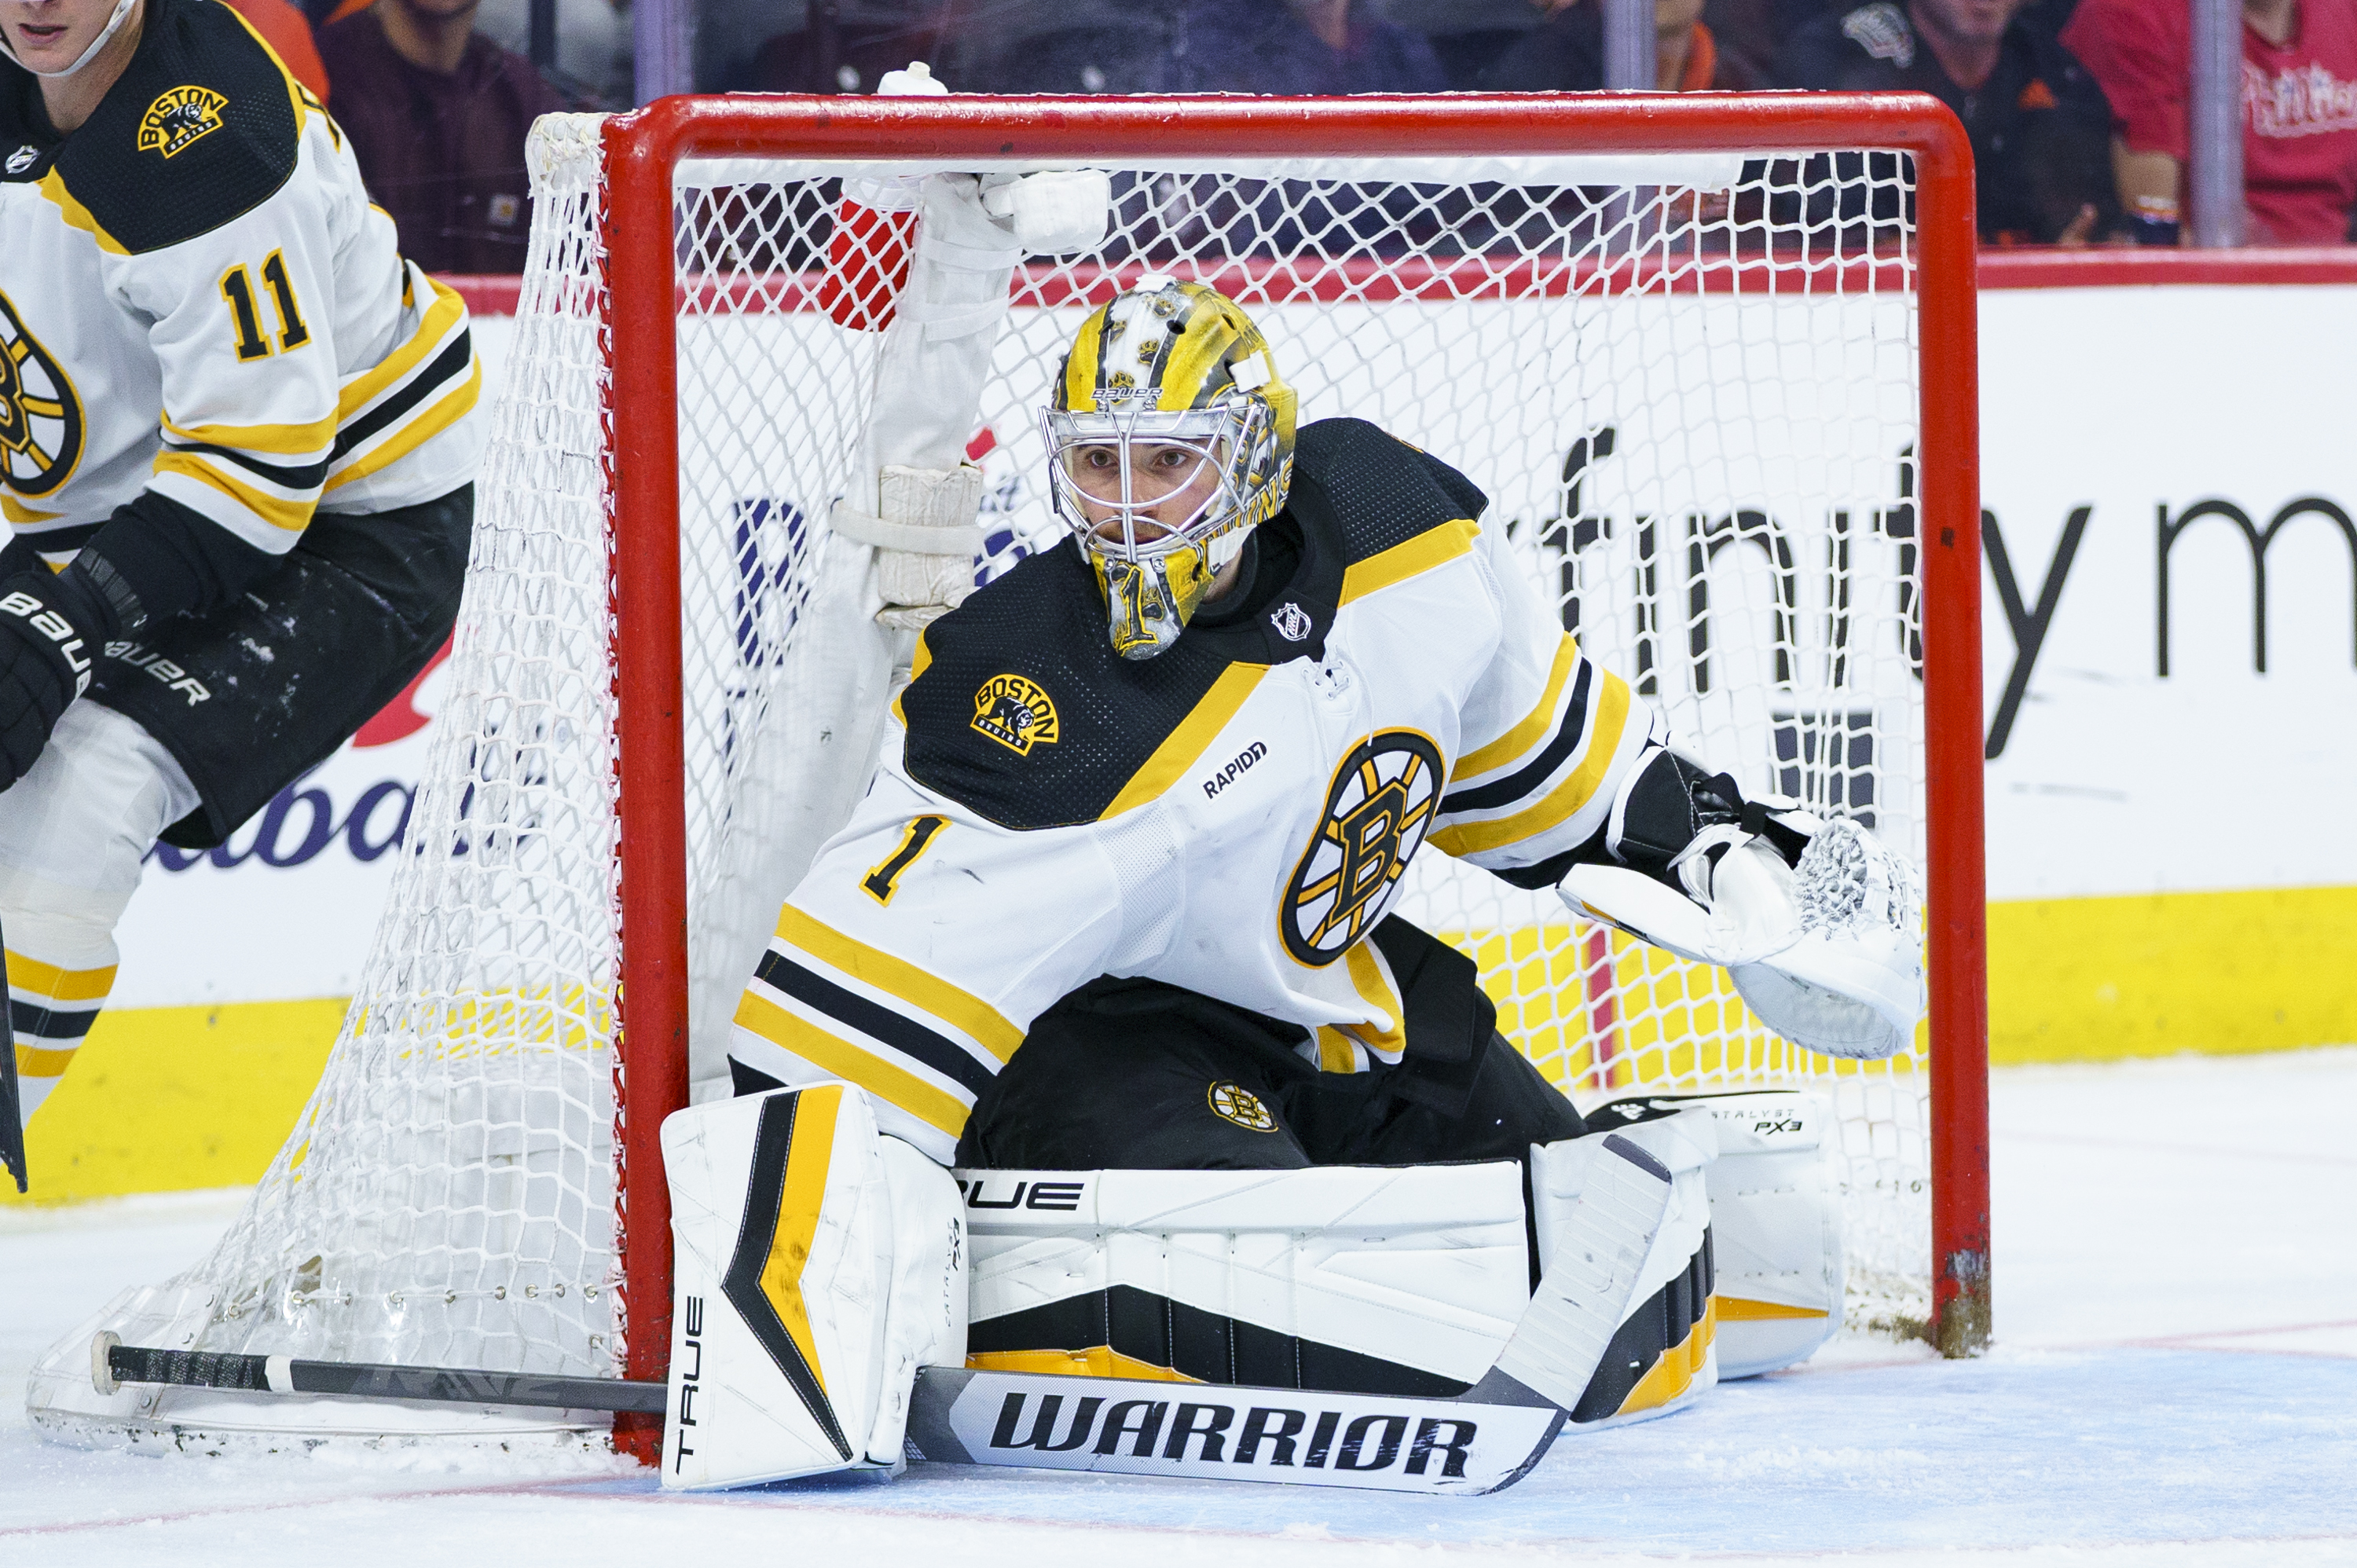 NHL Predictions: April 9 with Bruins vs Flyers